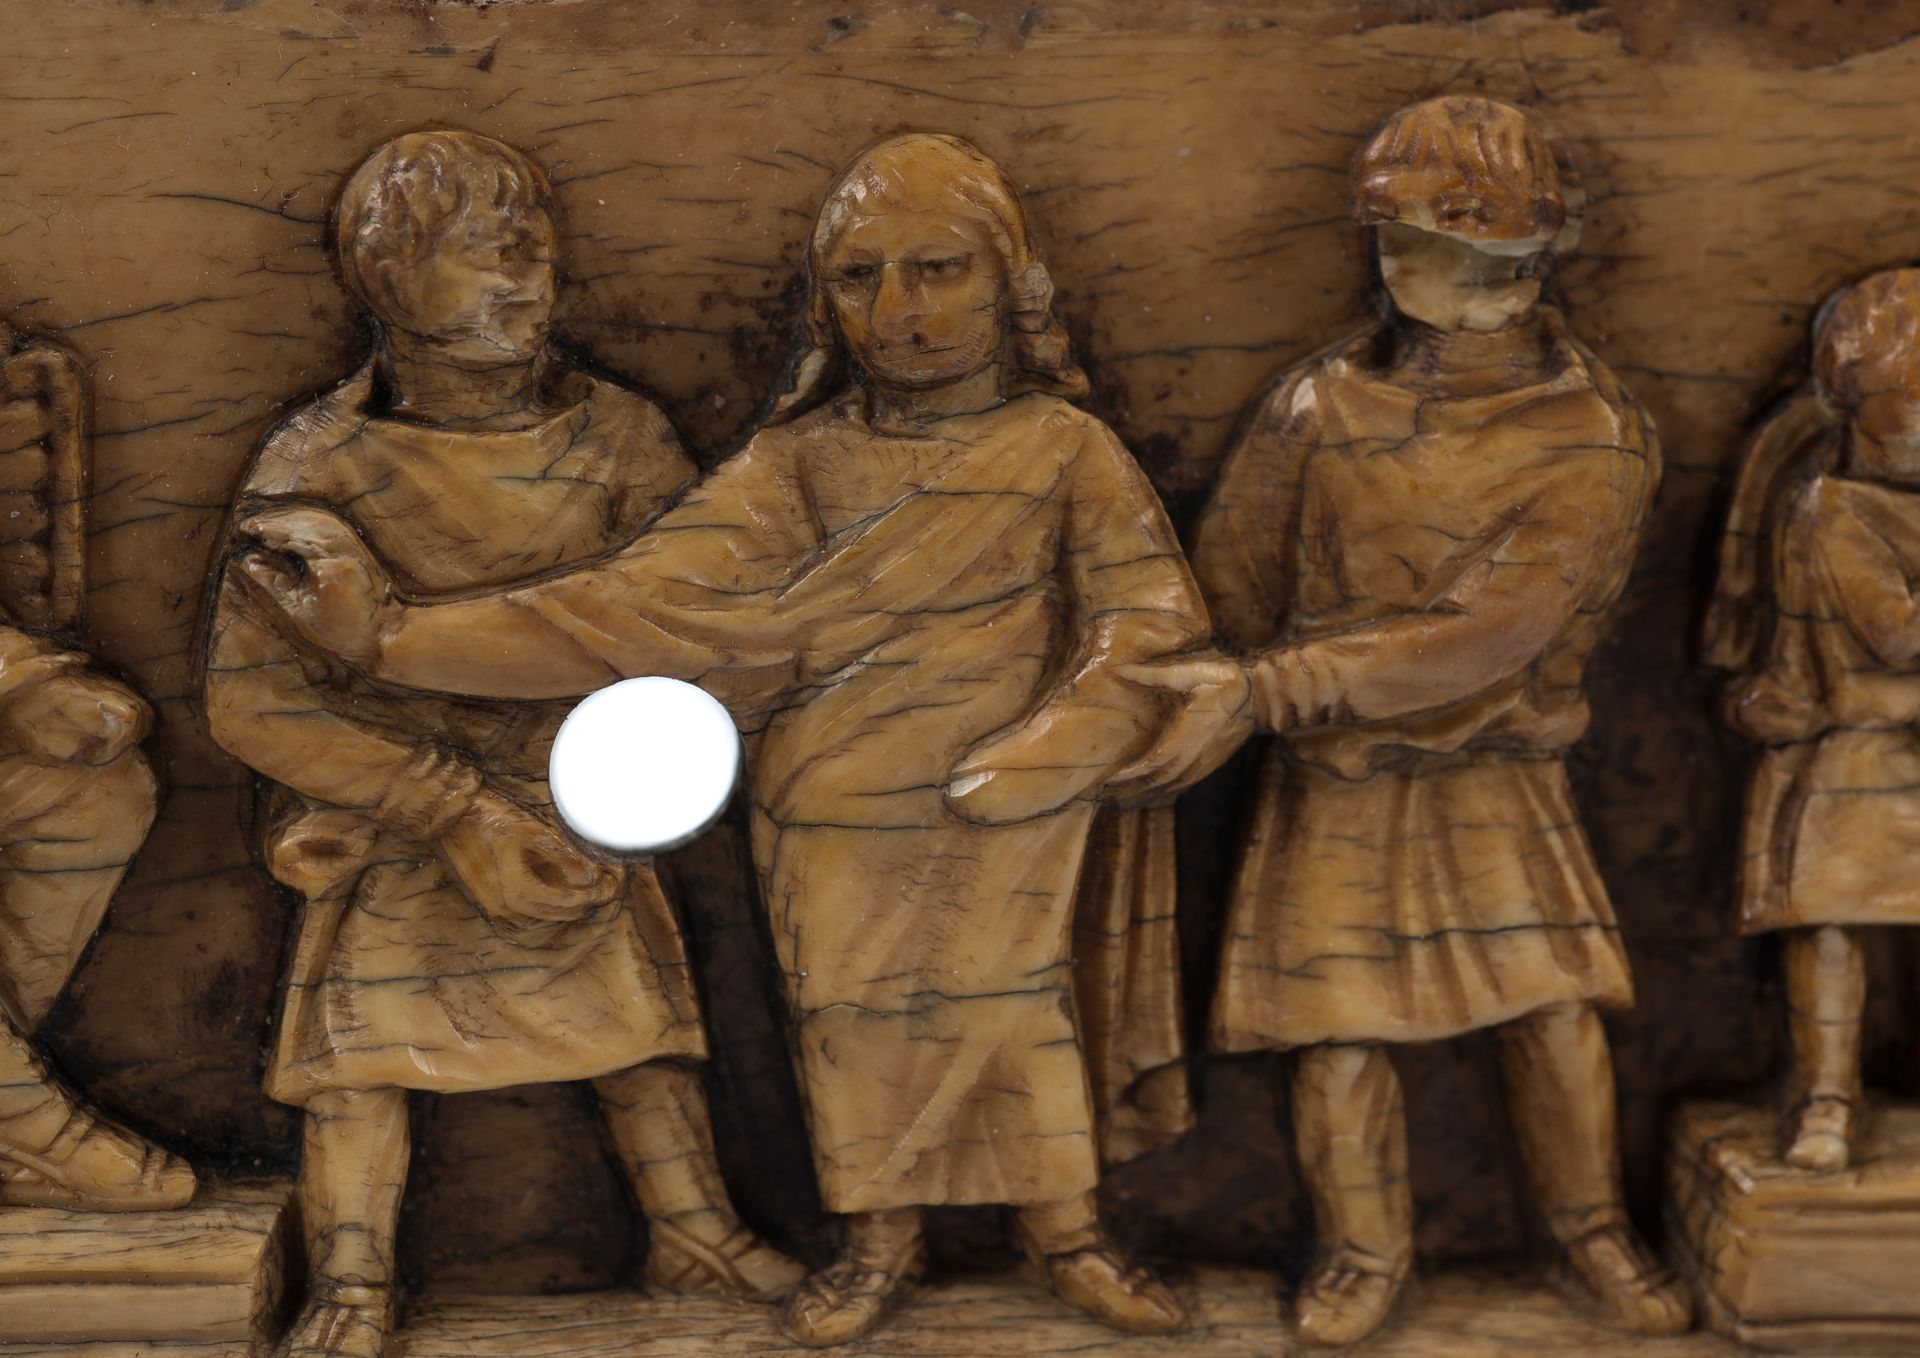 "The trial of Christ". Sculpted ivory relief. Carolingian Period. 6th - 9th century. - Image 3 of 9